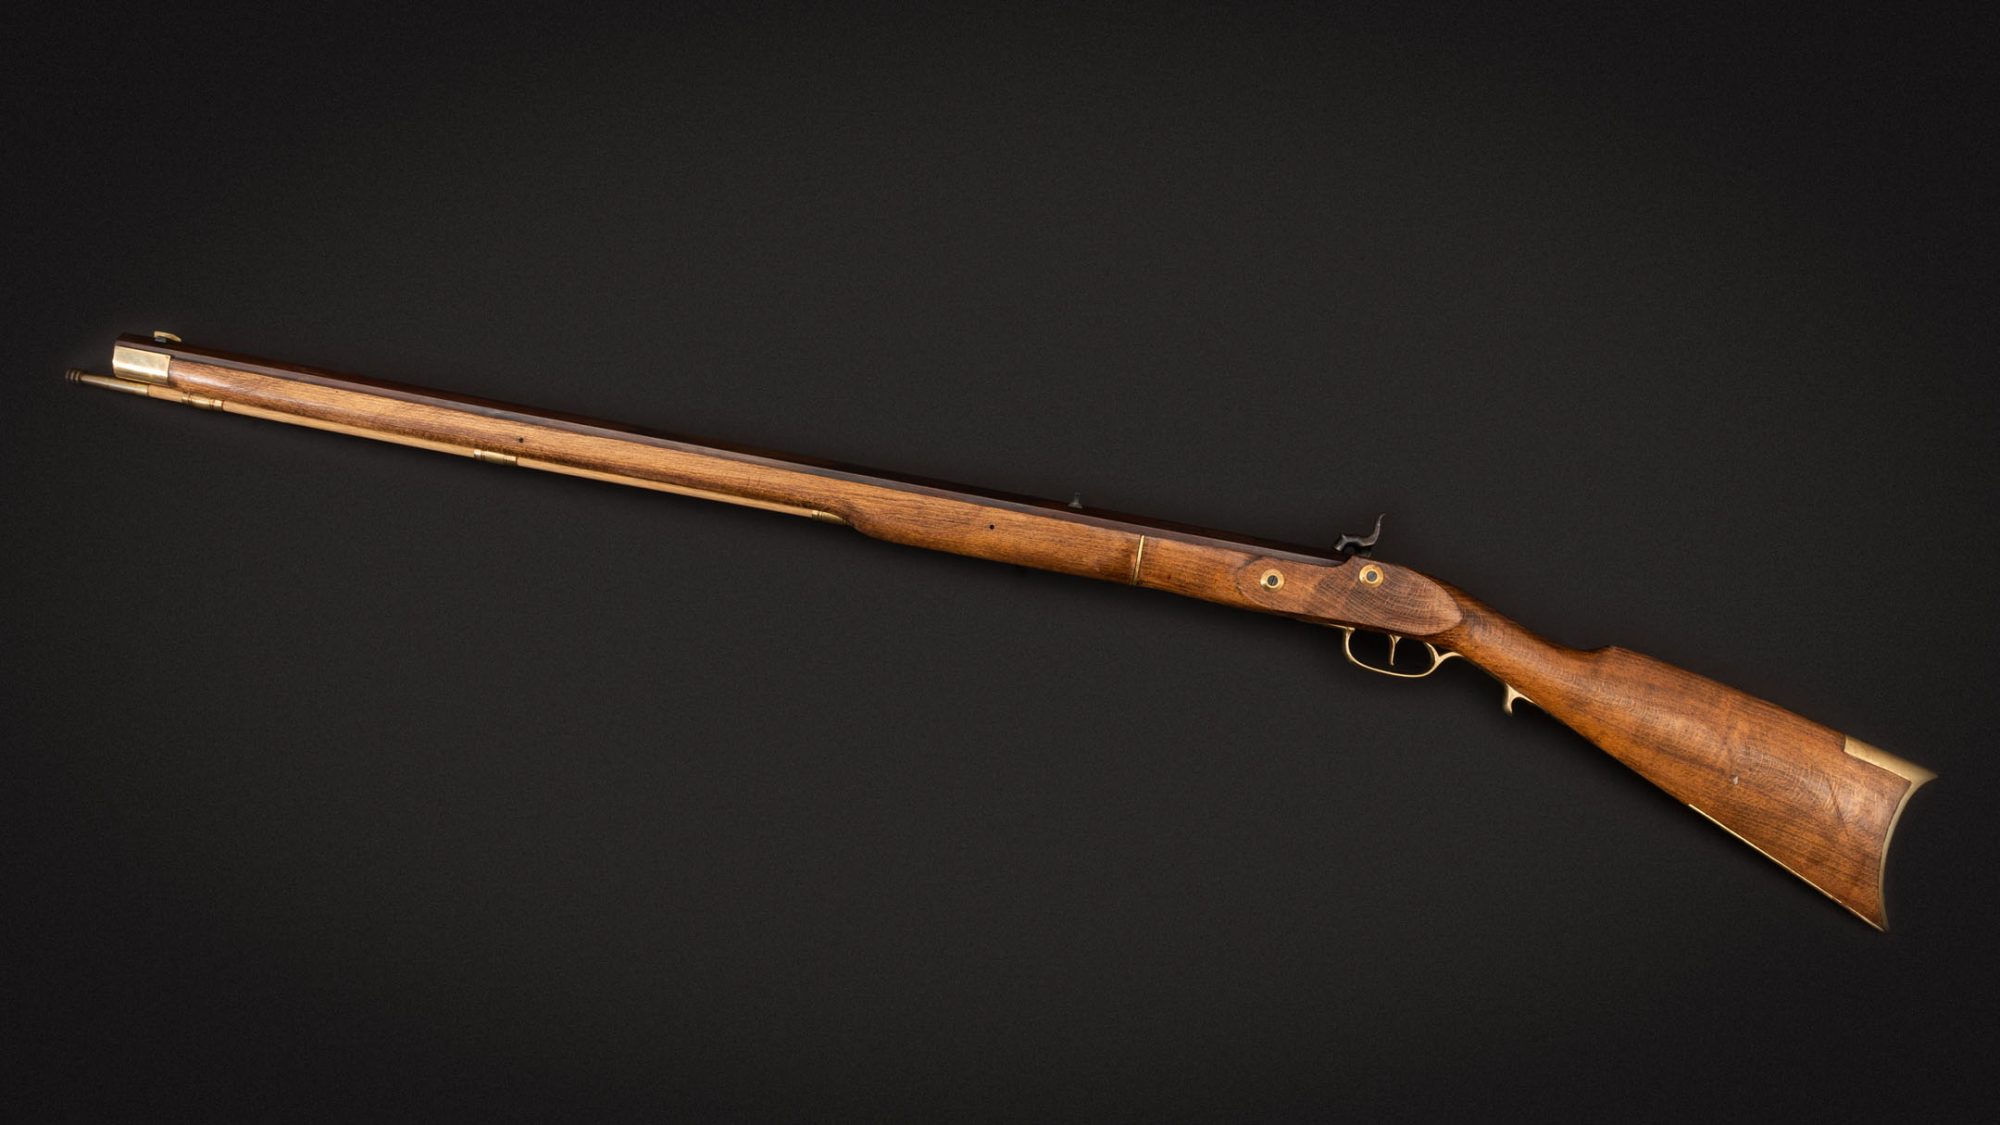 Photo of a Traditions Kentucky Muzzleloader for sale by Turnbull Restoration of Bloomfield, NY